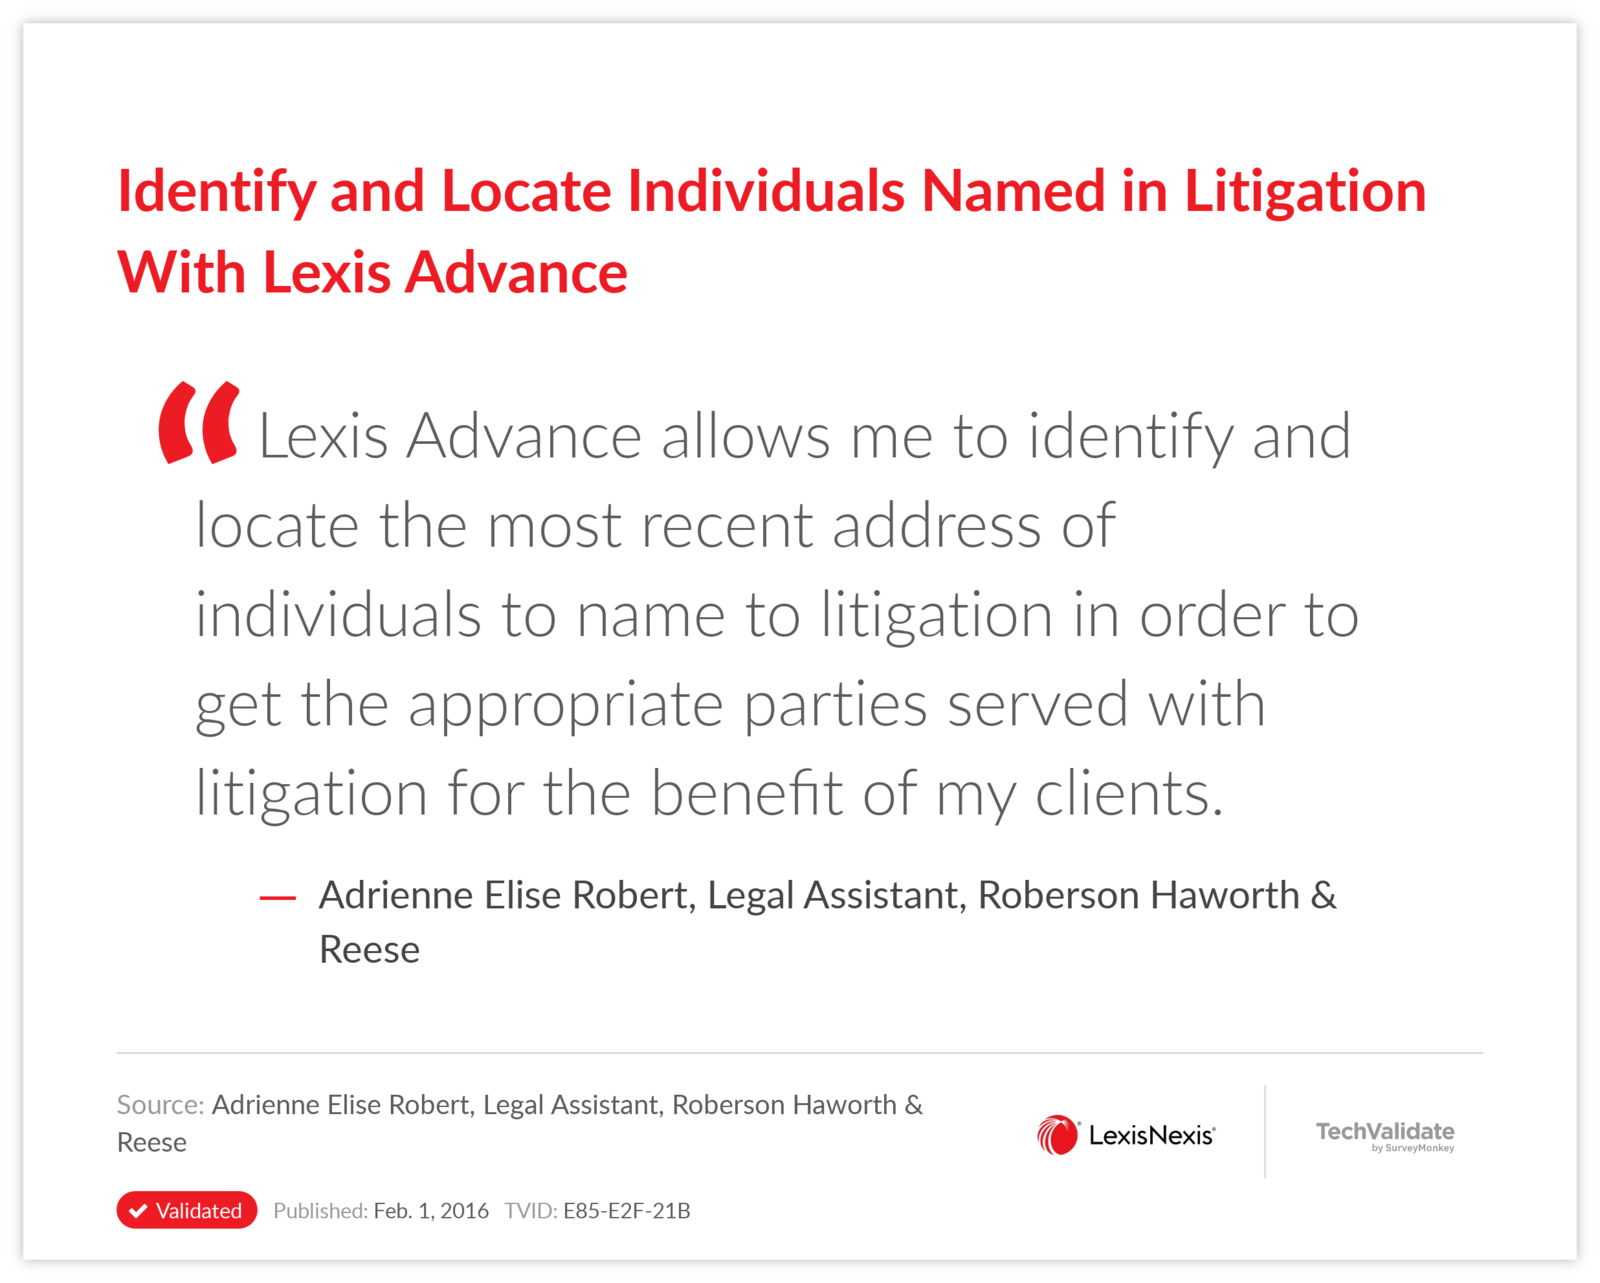 Identify and Locate Individuals Named in Litigation With Lexis Advance